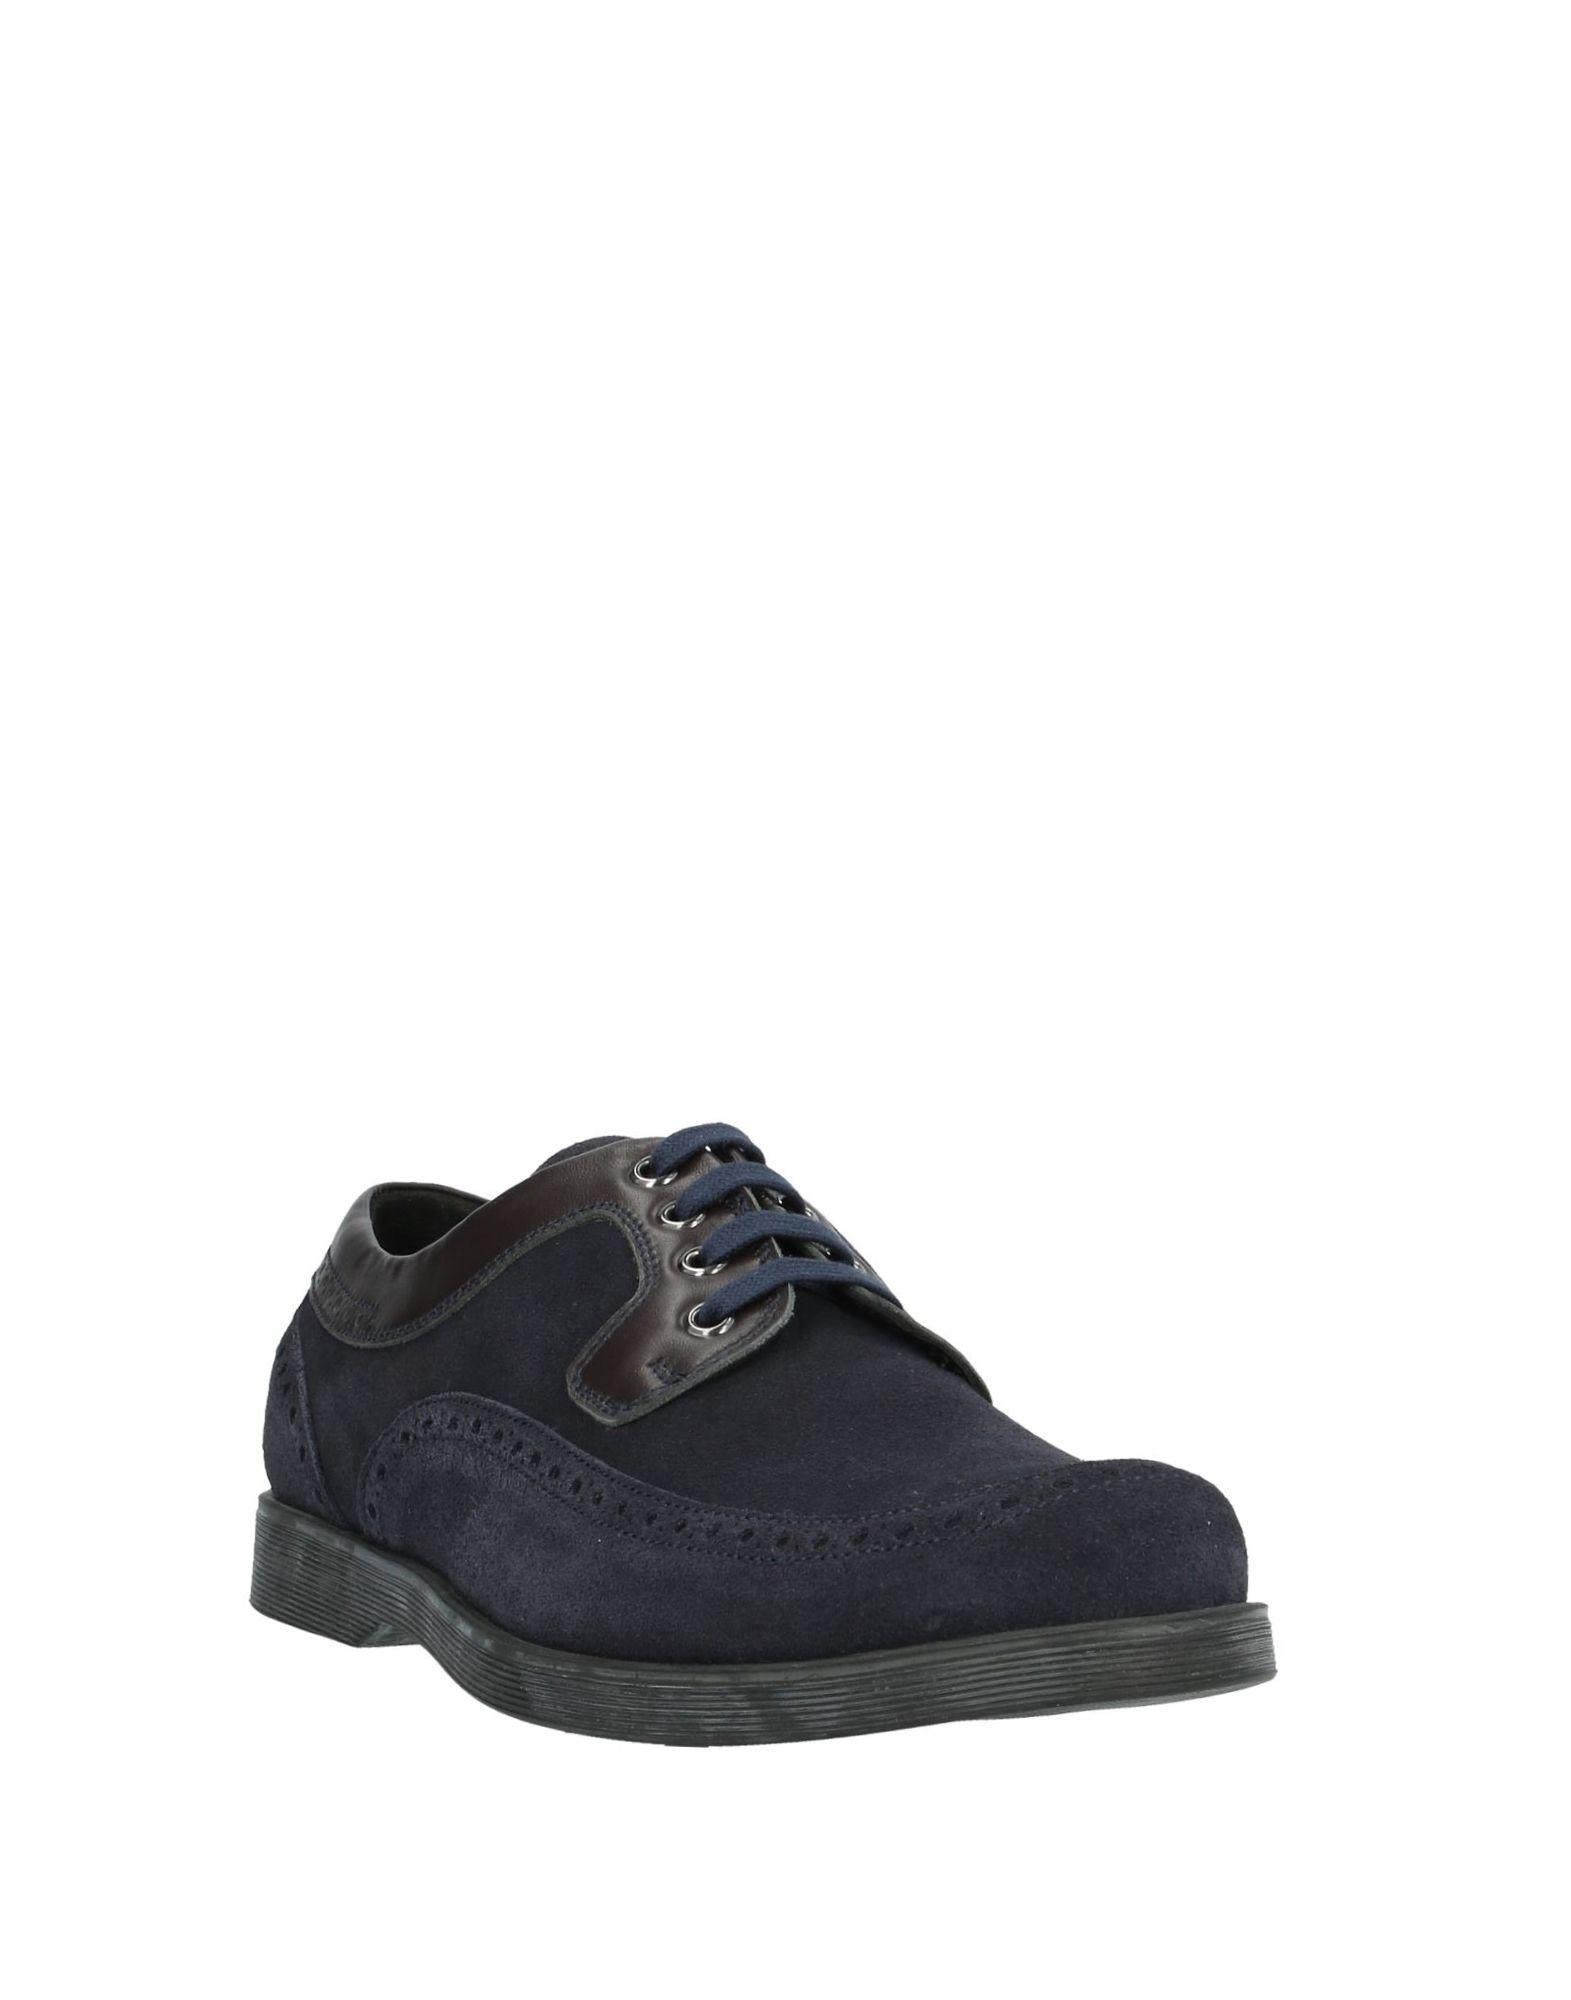 Fabiano Ricci Suede Lace-up Shoe in Dark Blue (Blue) for Men - Lyst